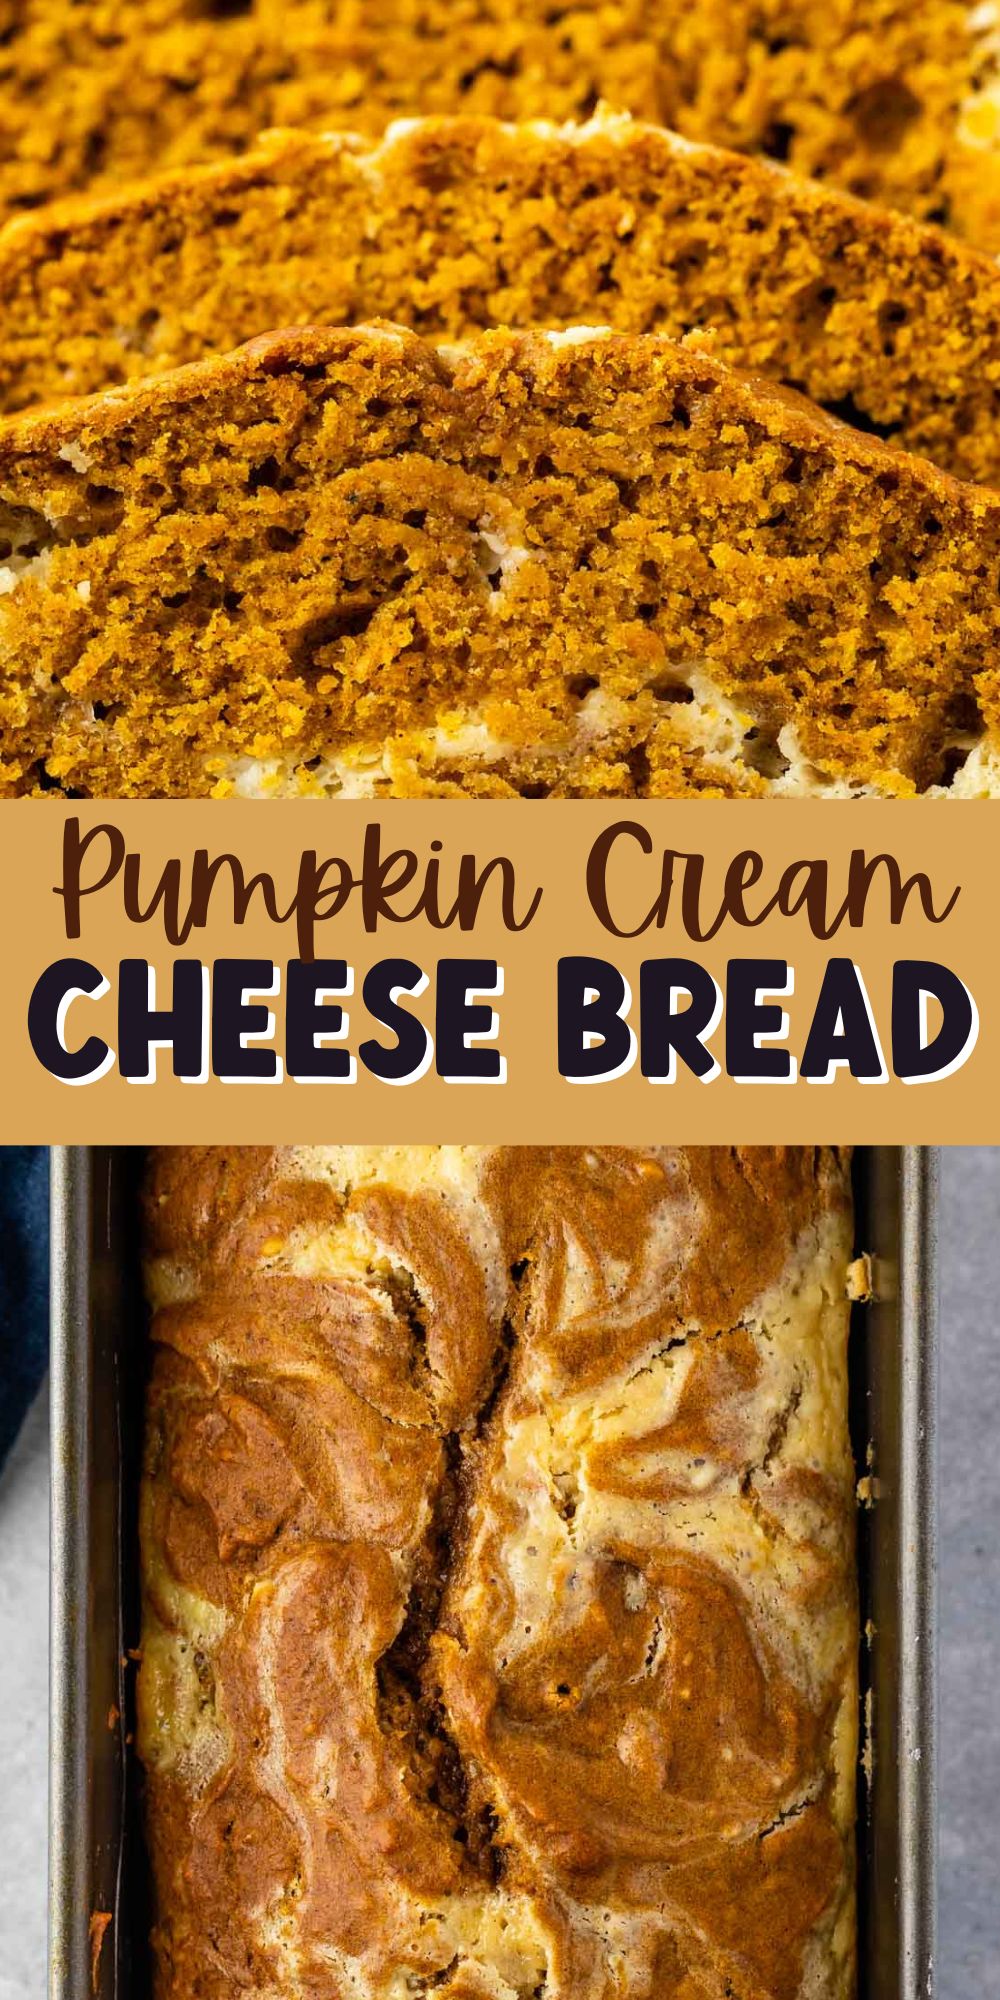 two photos of the pumpkin loaf with one is the pan and one sliced and words in the middle saying the name of the recipe